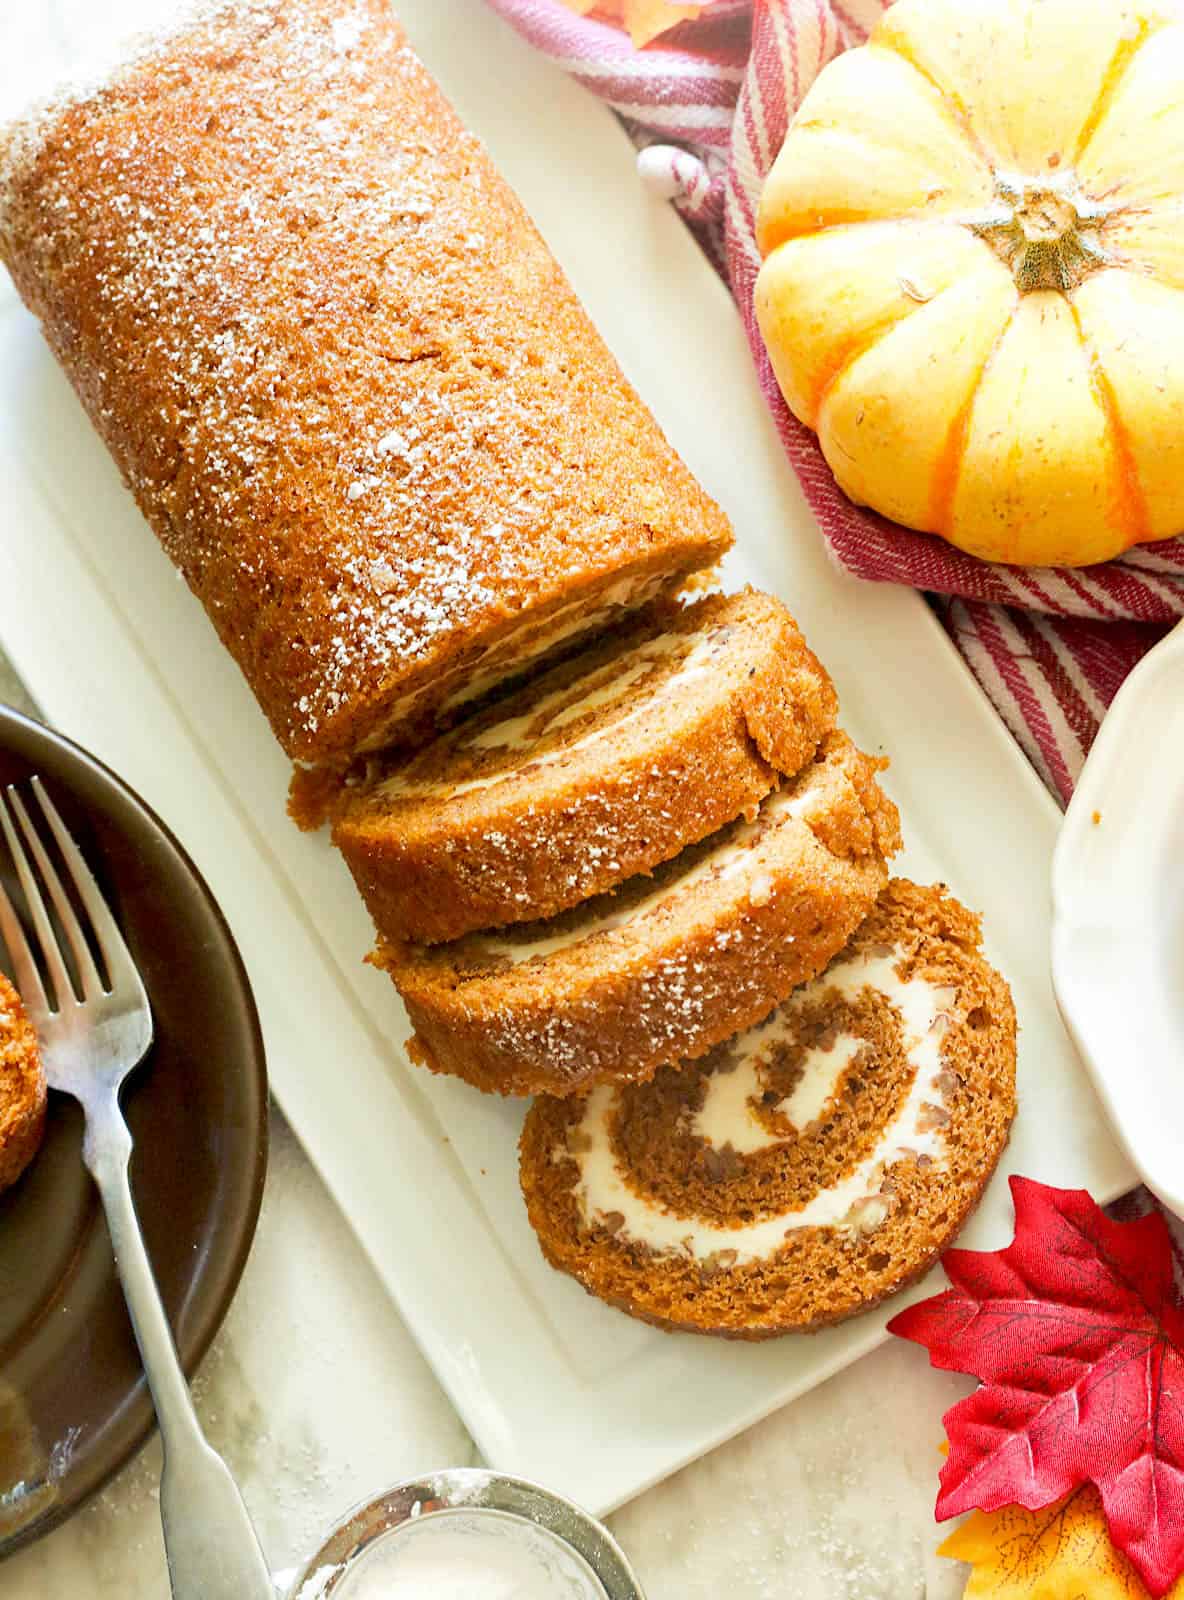 Sweet and delicious Pumpkin Roll